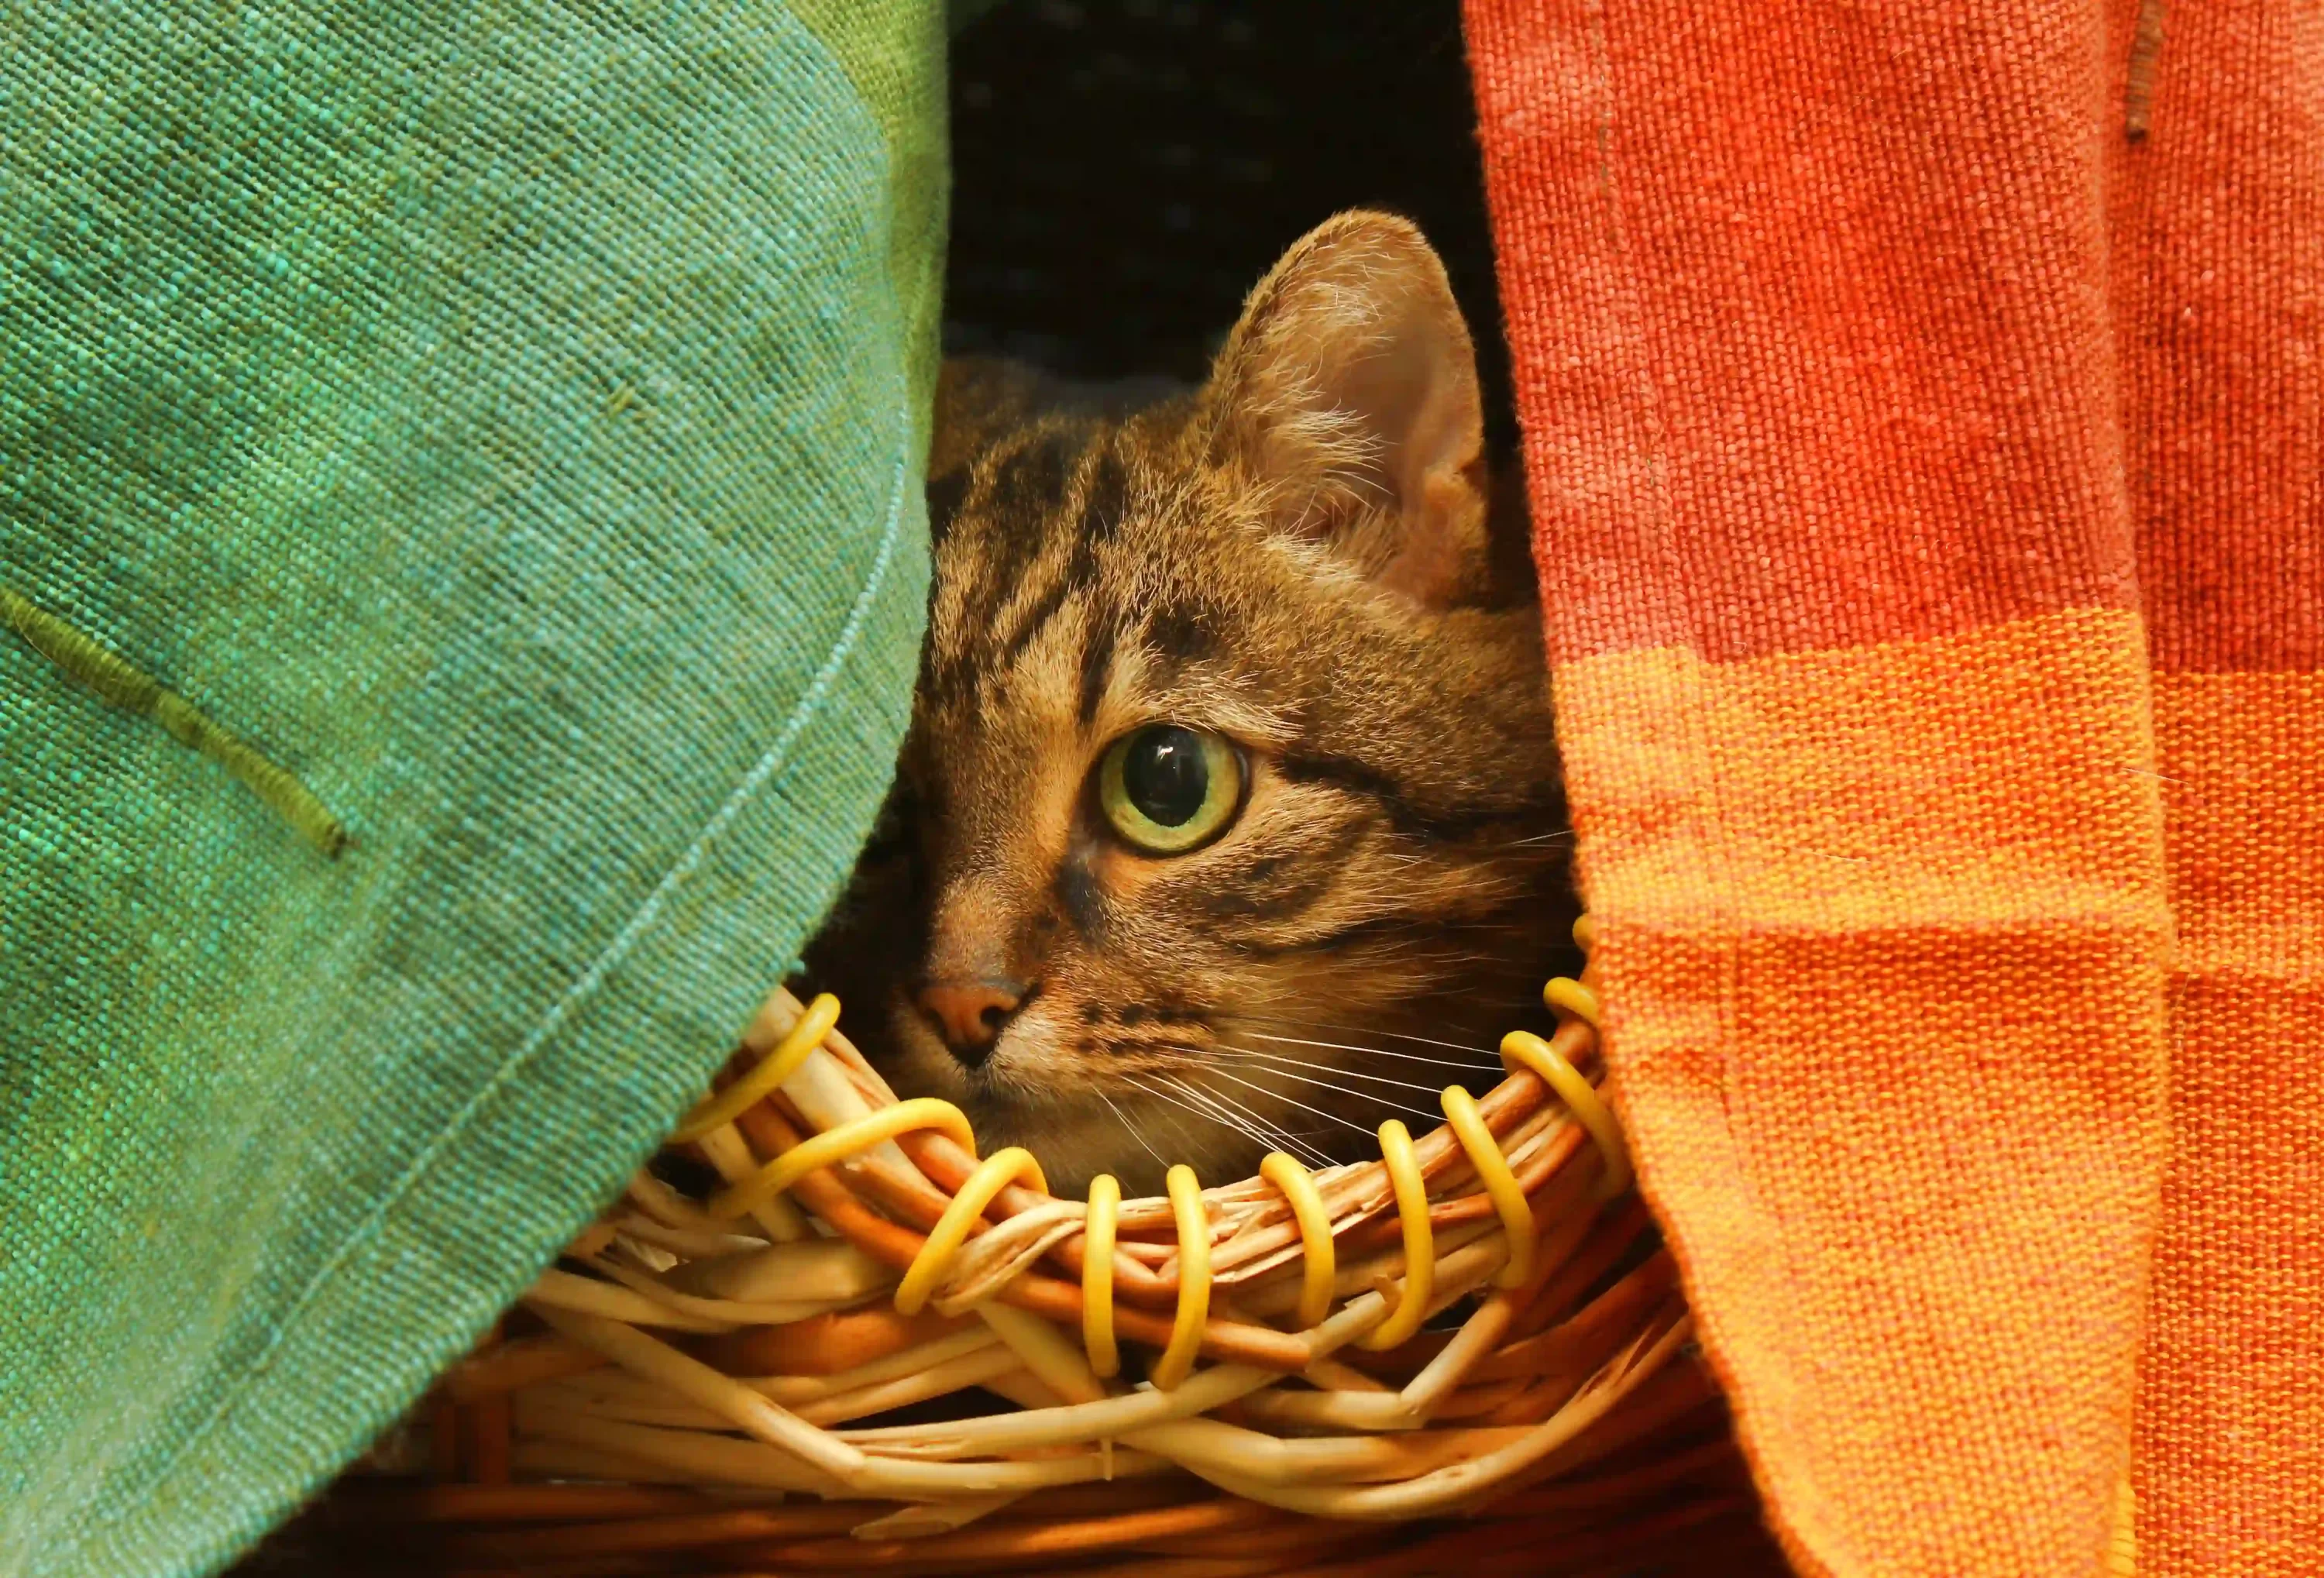 Cat hiding behind towels. Preparing your pet for gathering